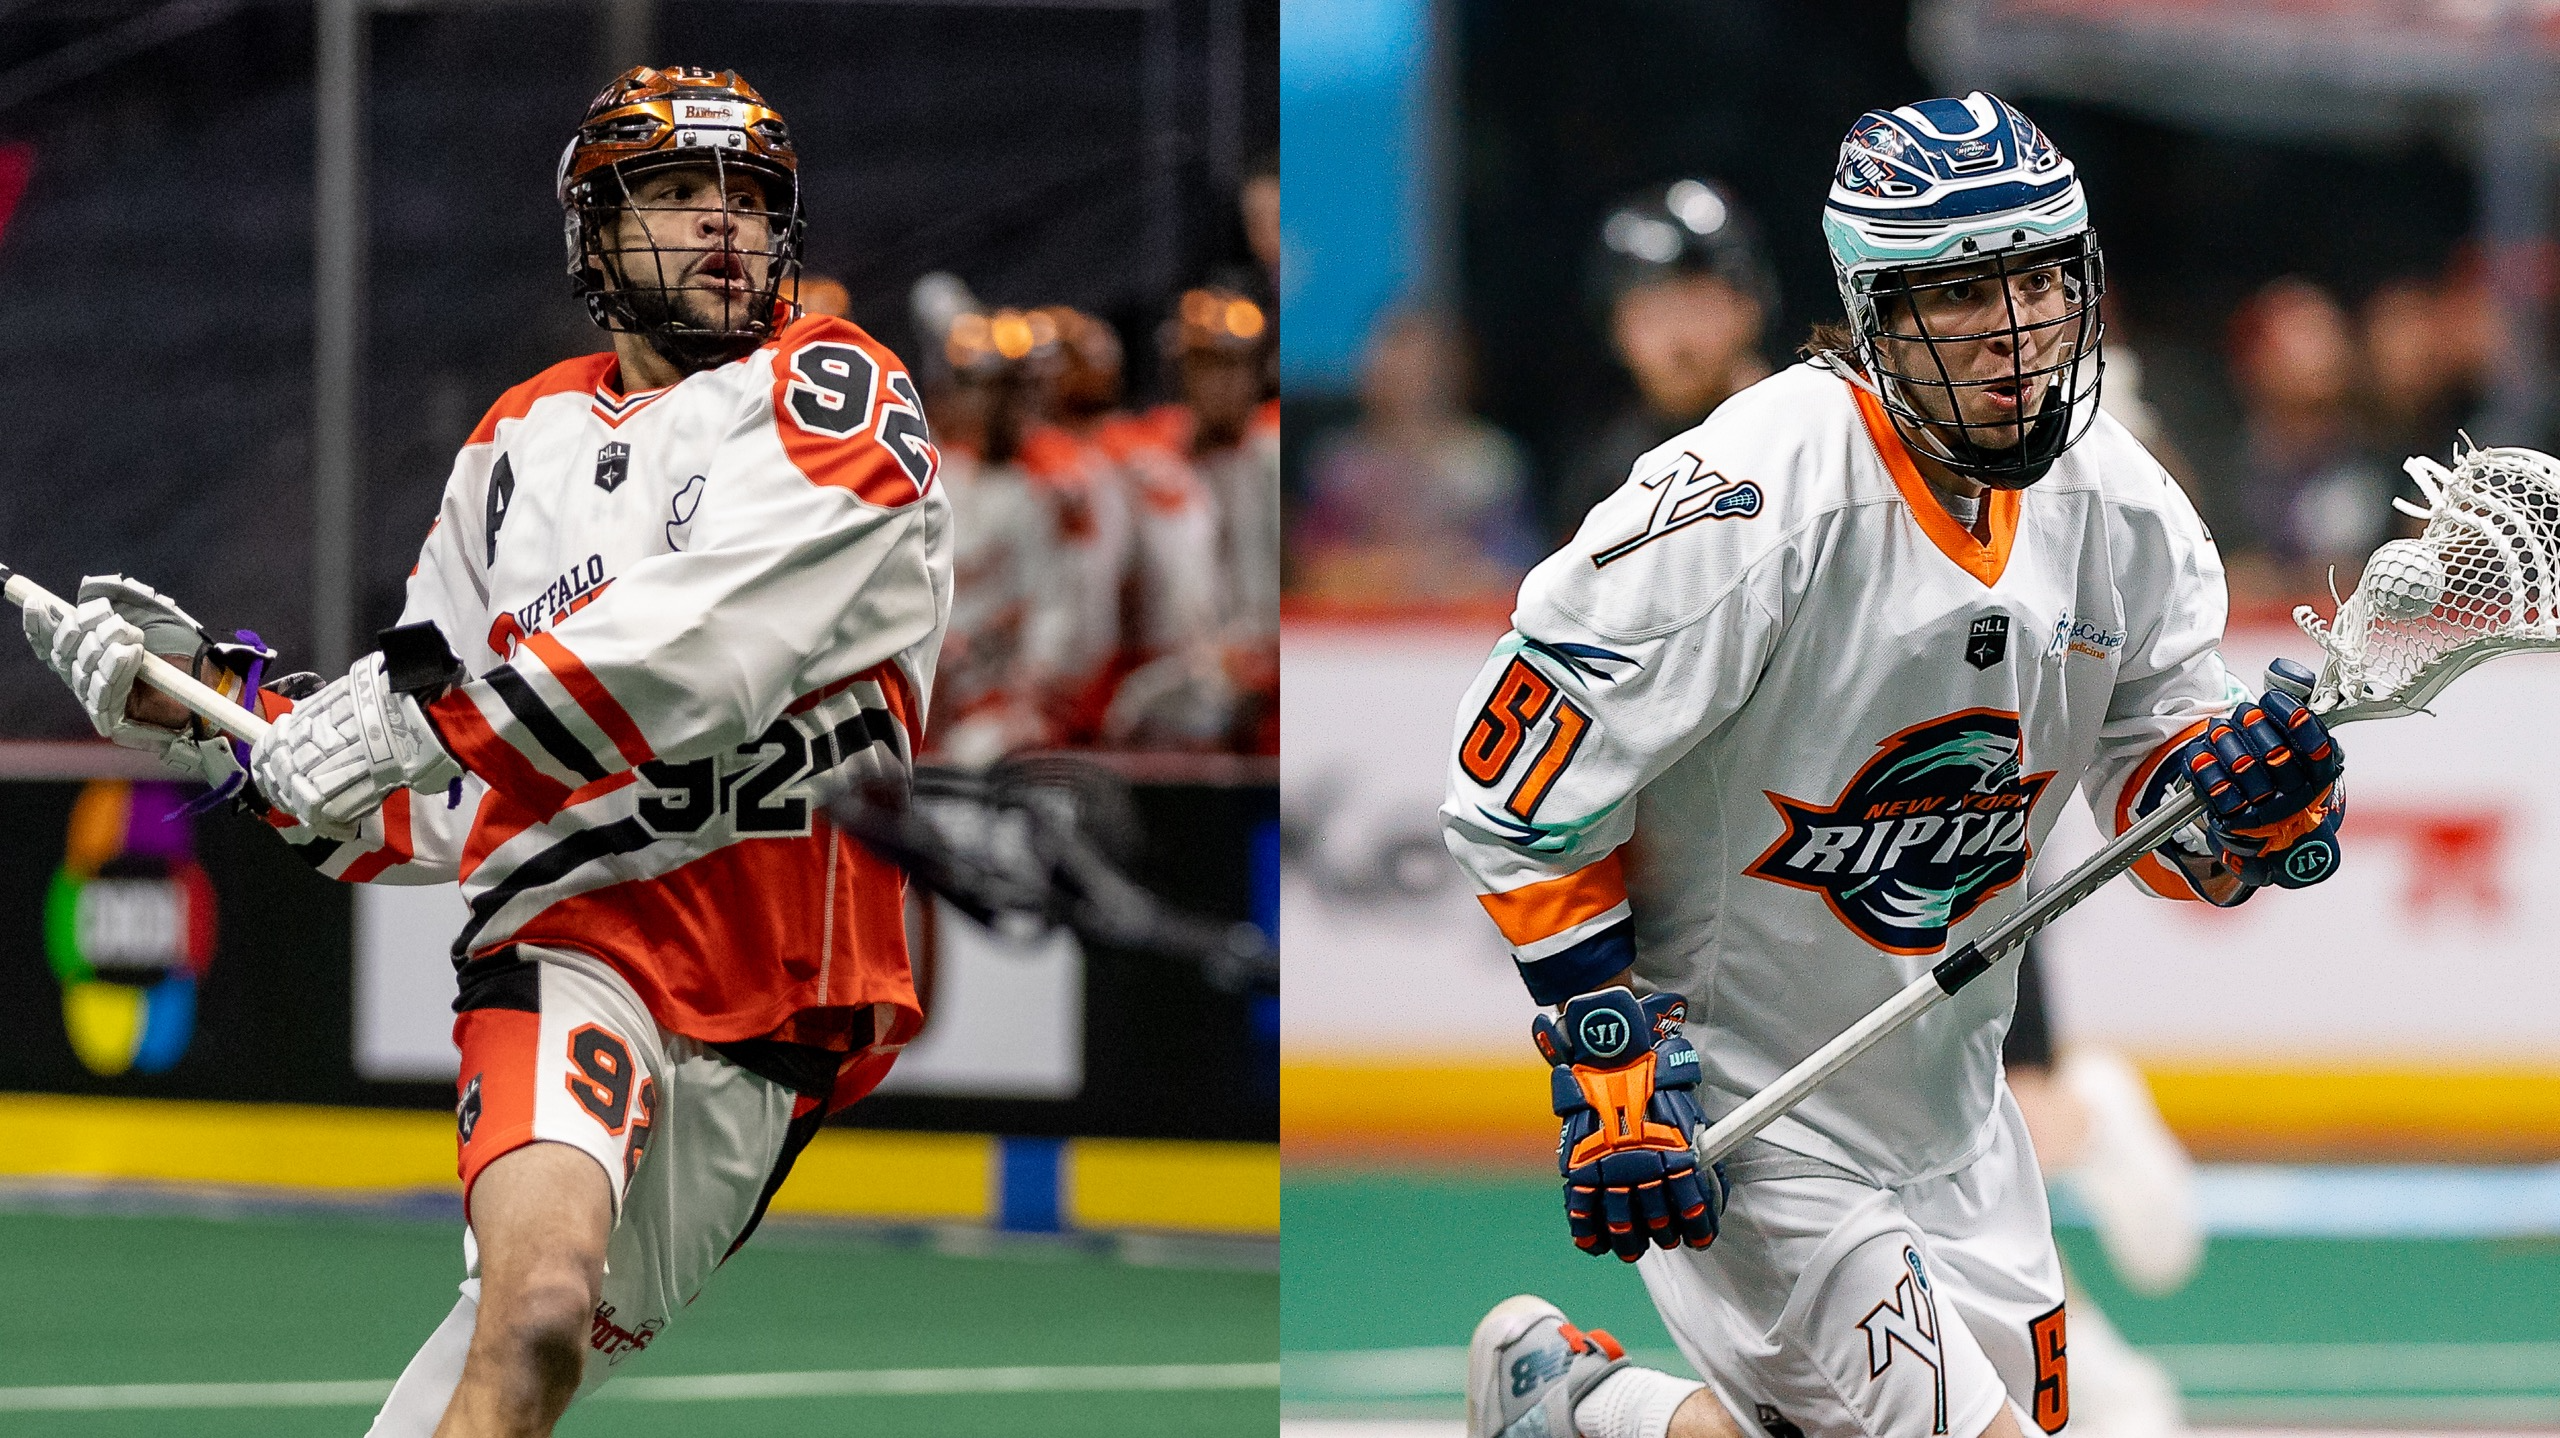 NLL Awards: Del Bianco Wins MVP Award; Donville Named Top Rookie